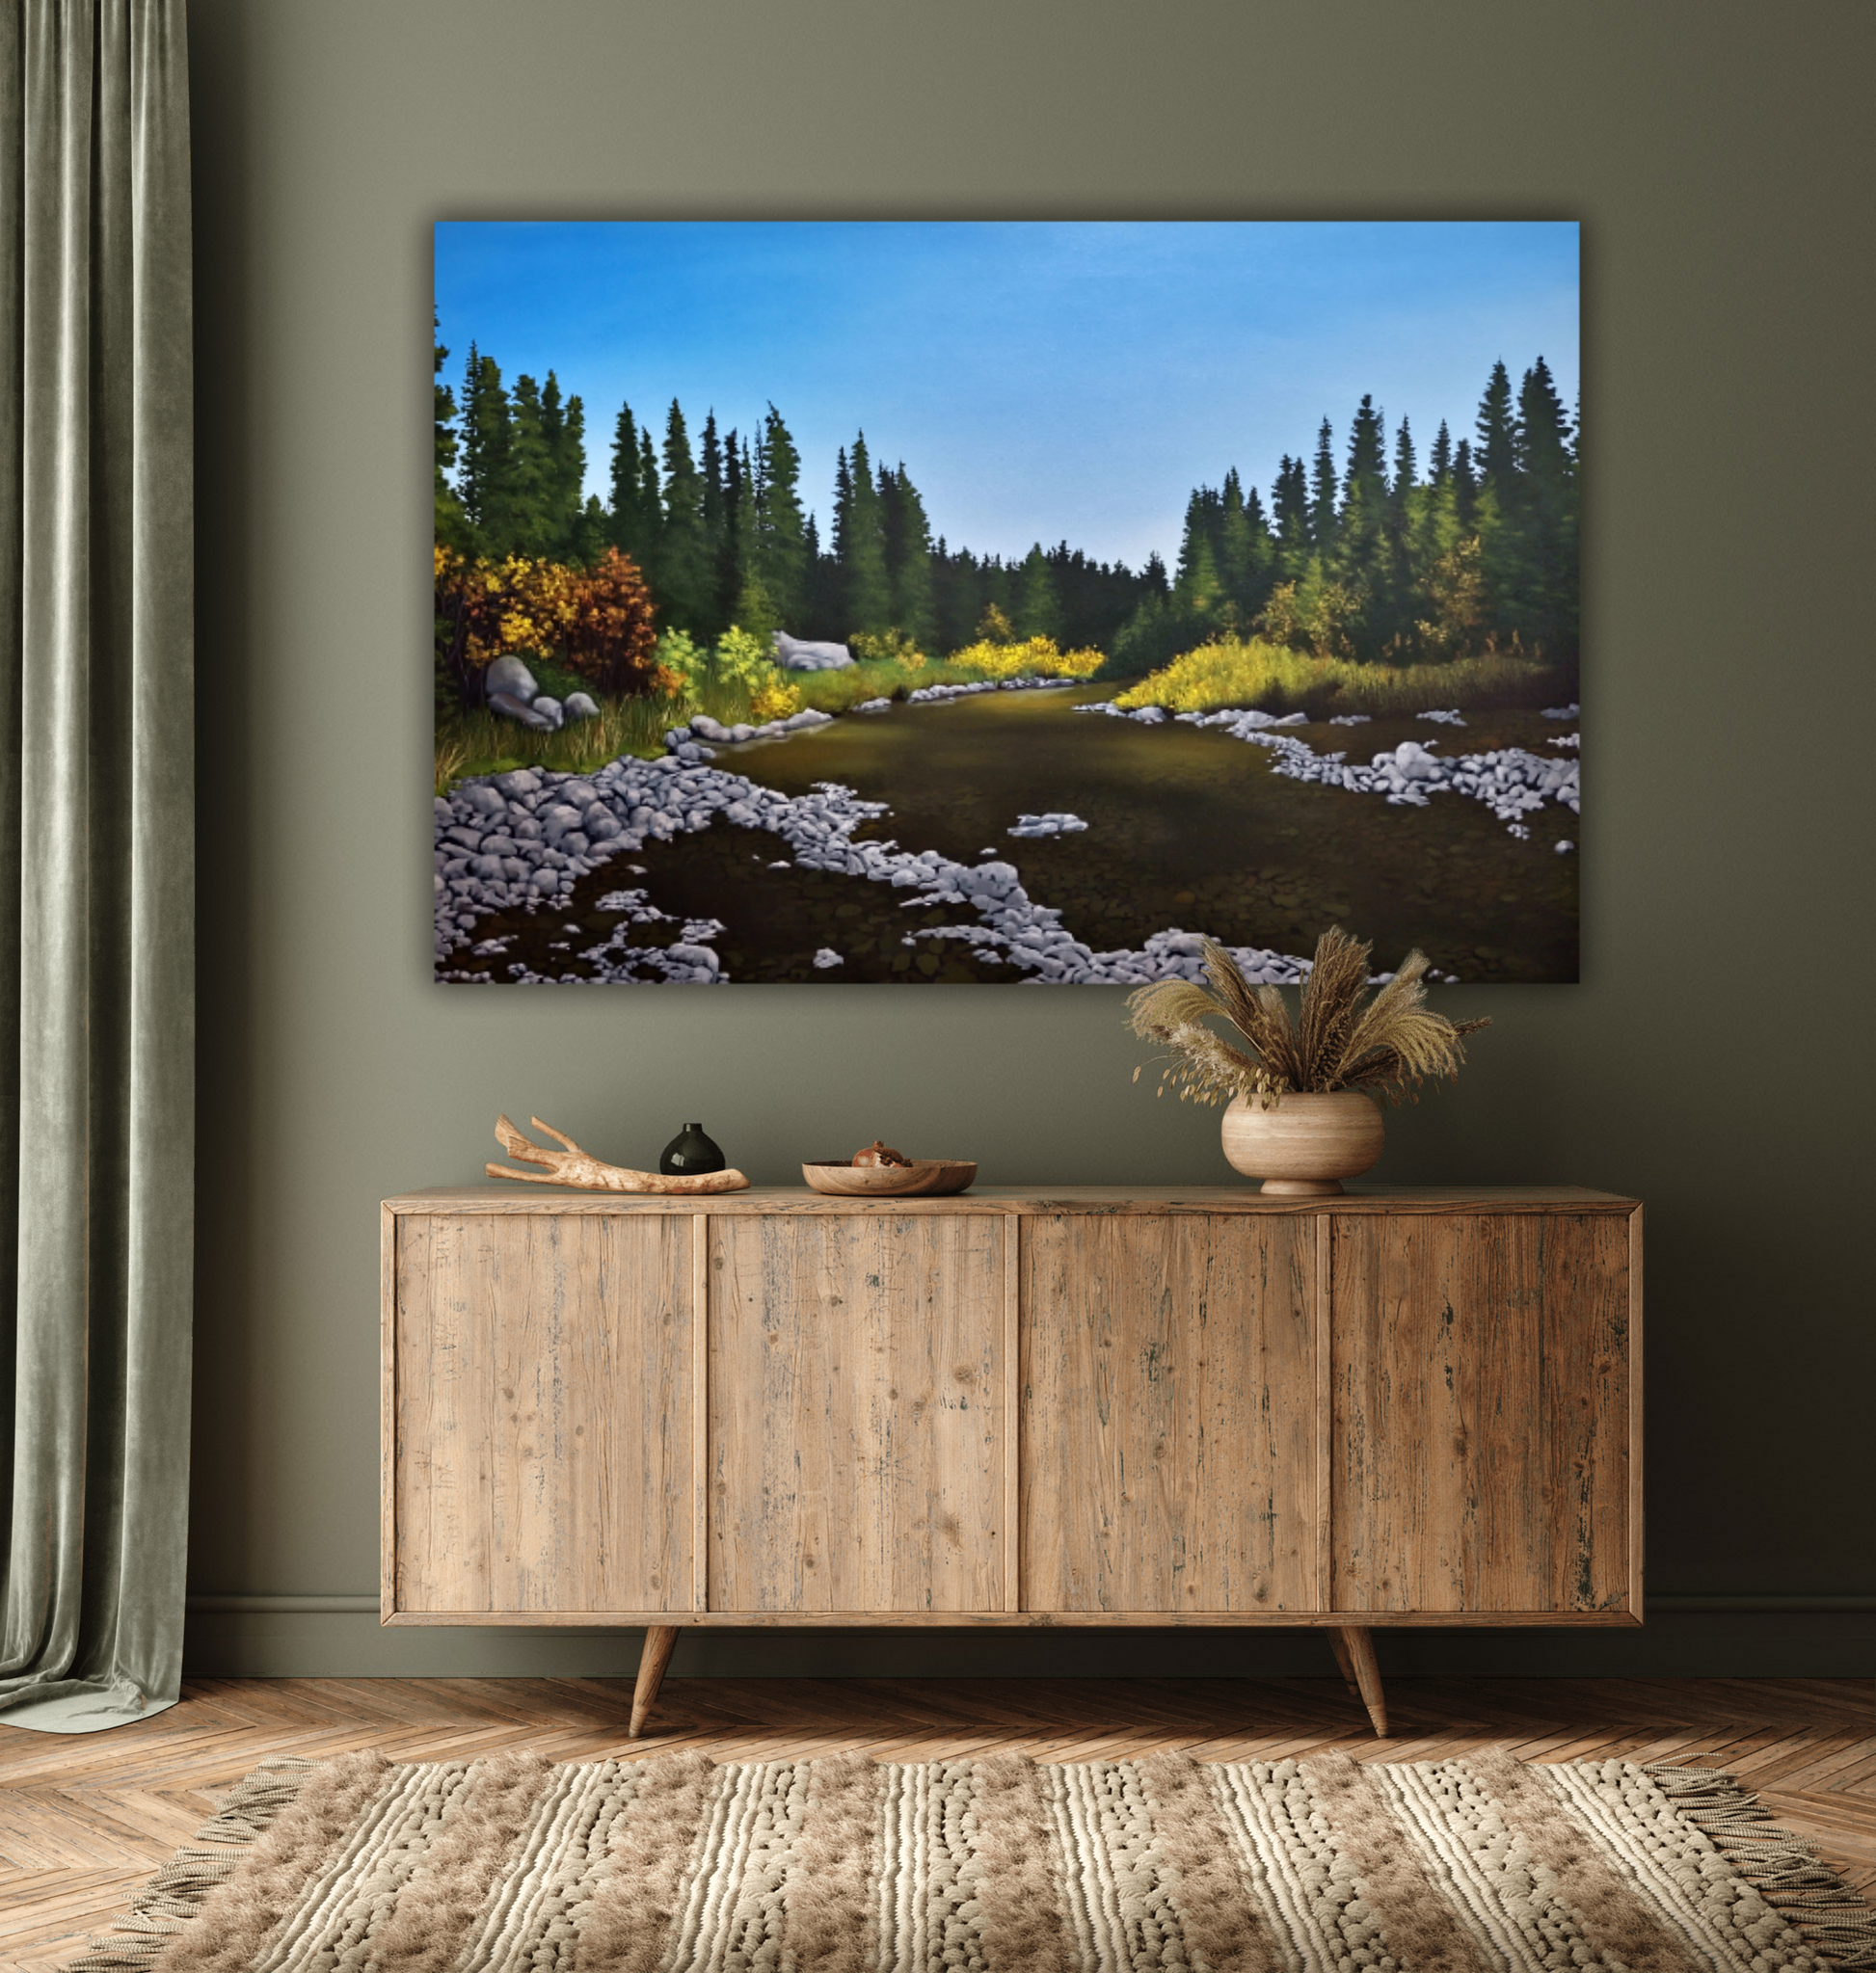 Intermission -  An original landscape painting by Christina Gouldsborough Canadian Landscape Artist over a credenza on a green wall